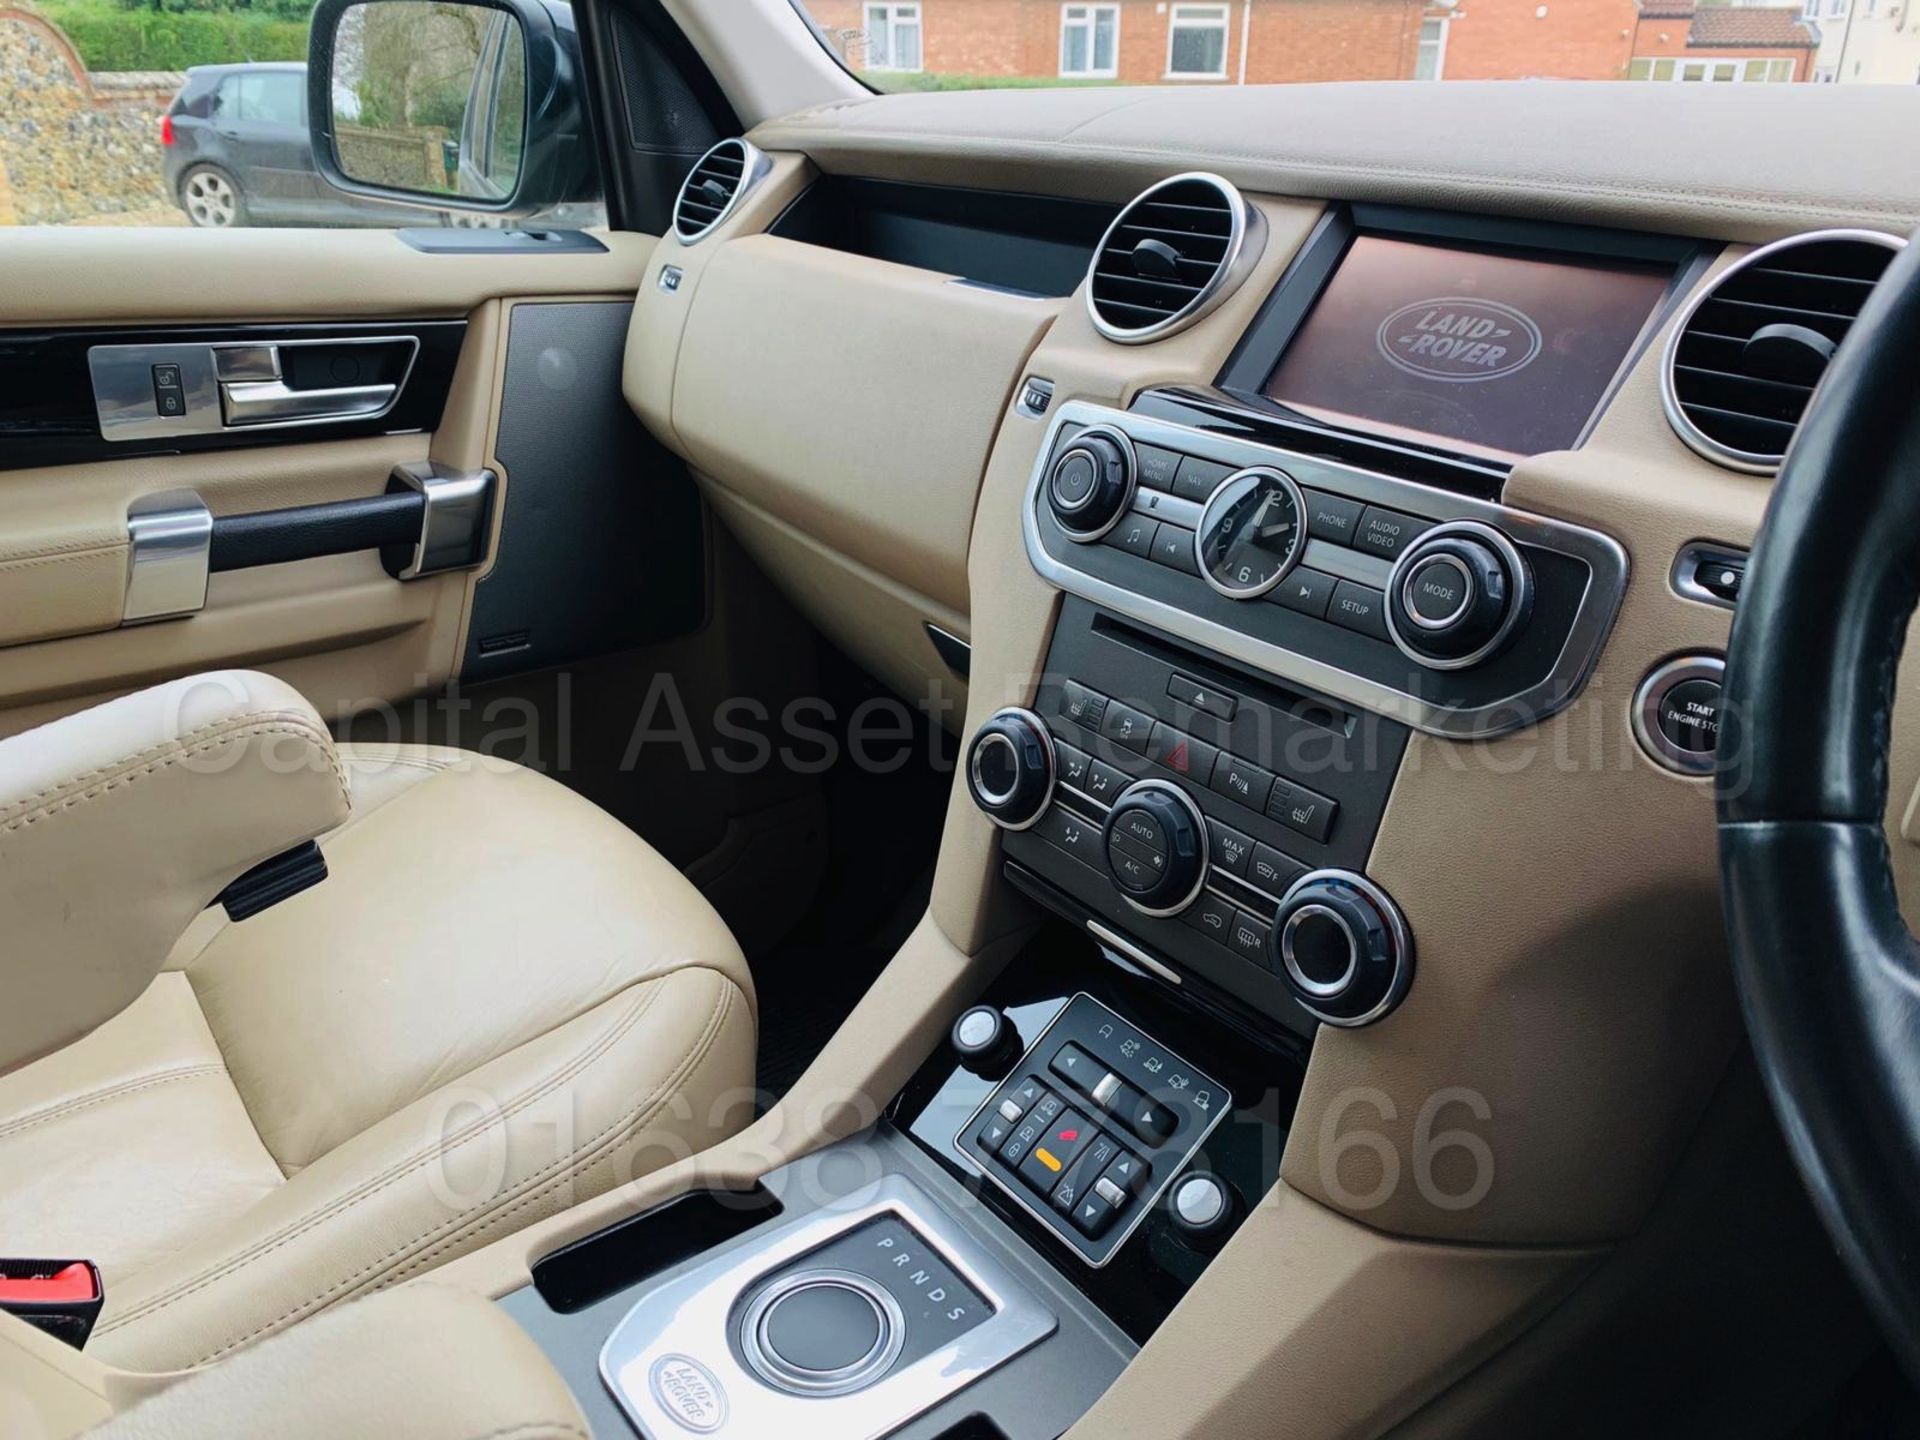 LAND ROVER DISCOVERY *HSE EDITION* 7 SEATER SUV (2012 MODEL) '3.0 SDV6- 8 SPEED AUTO' **HUGE SPEC** - Image 28 of 48